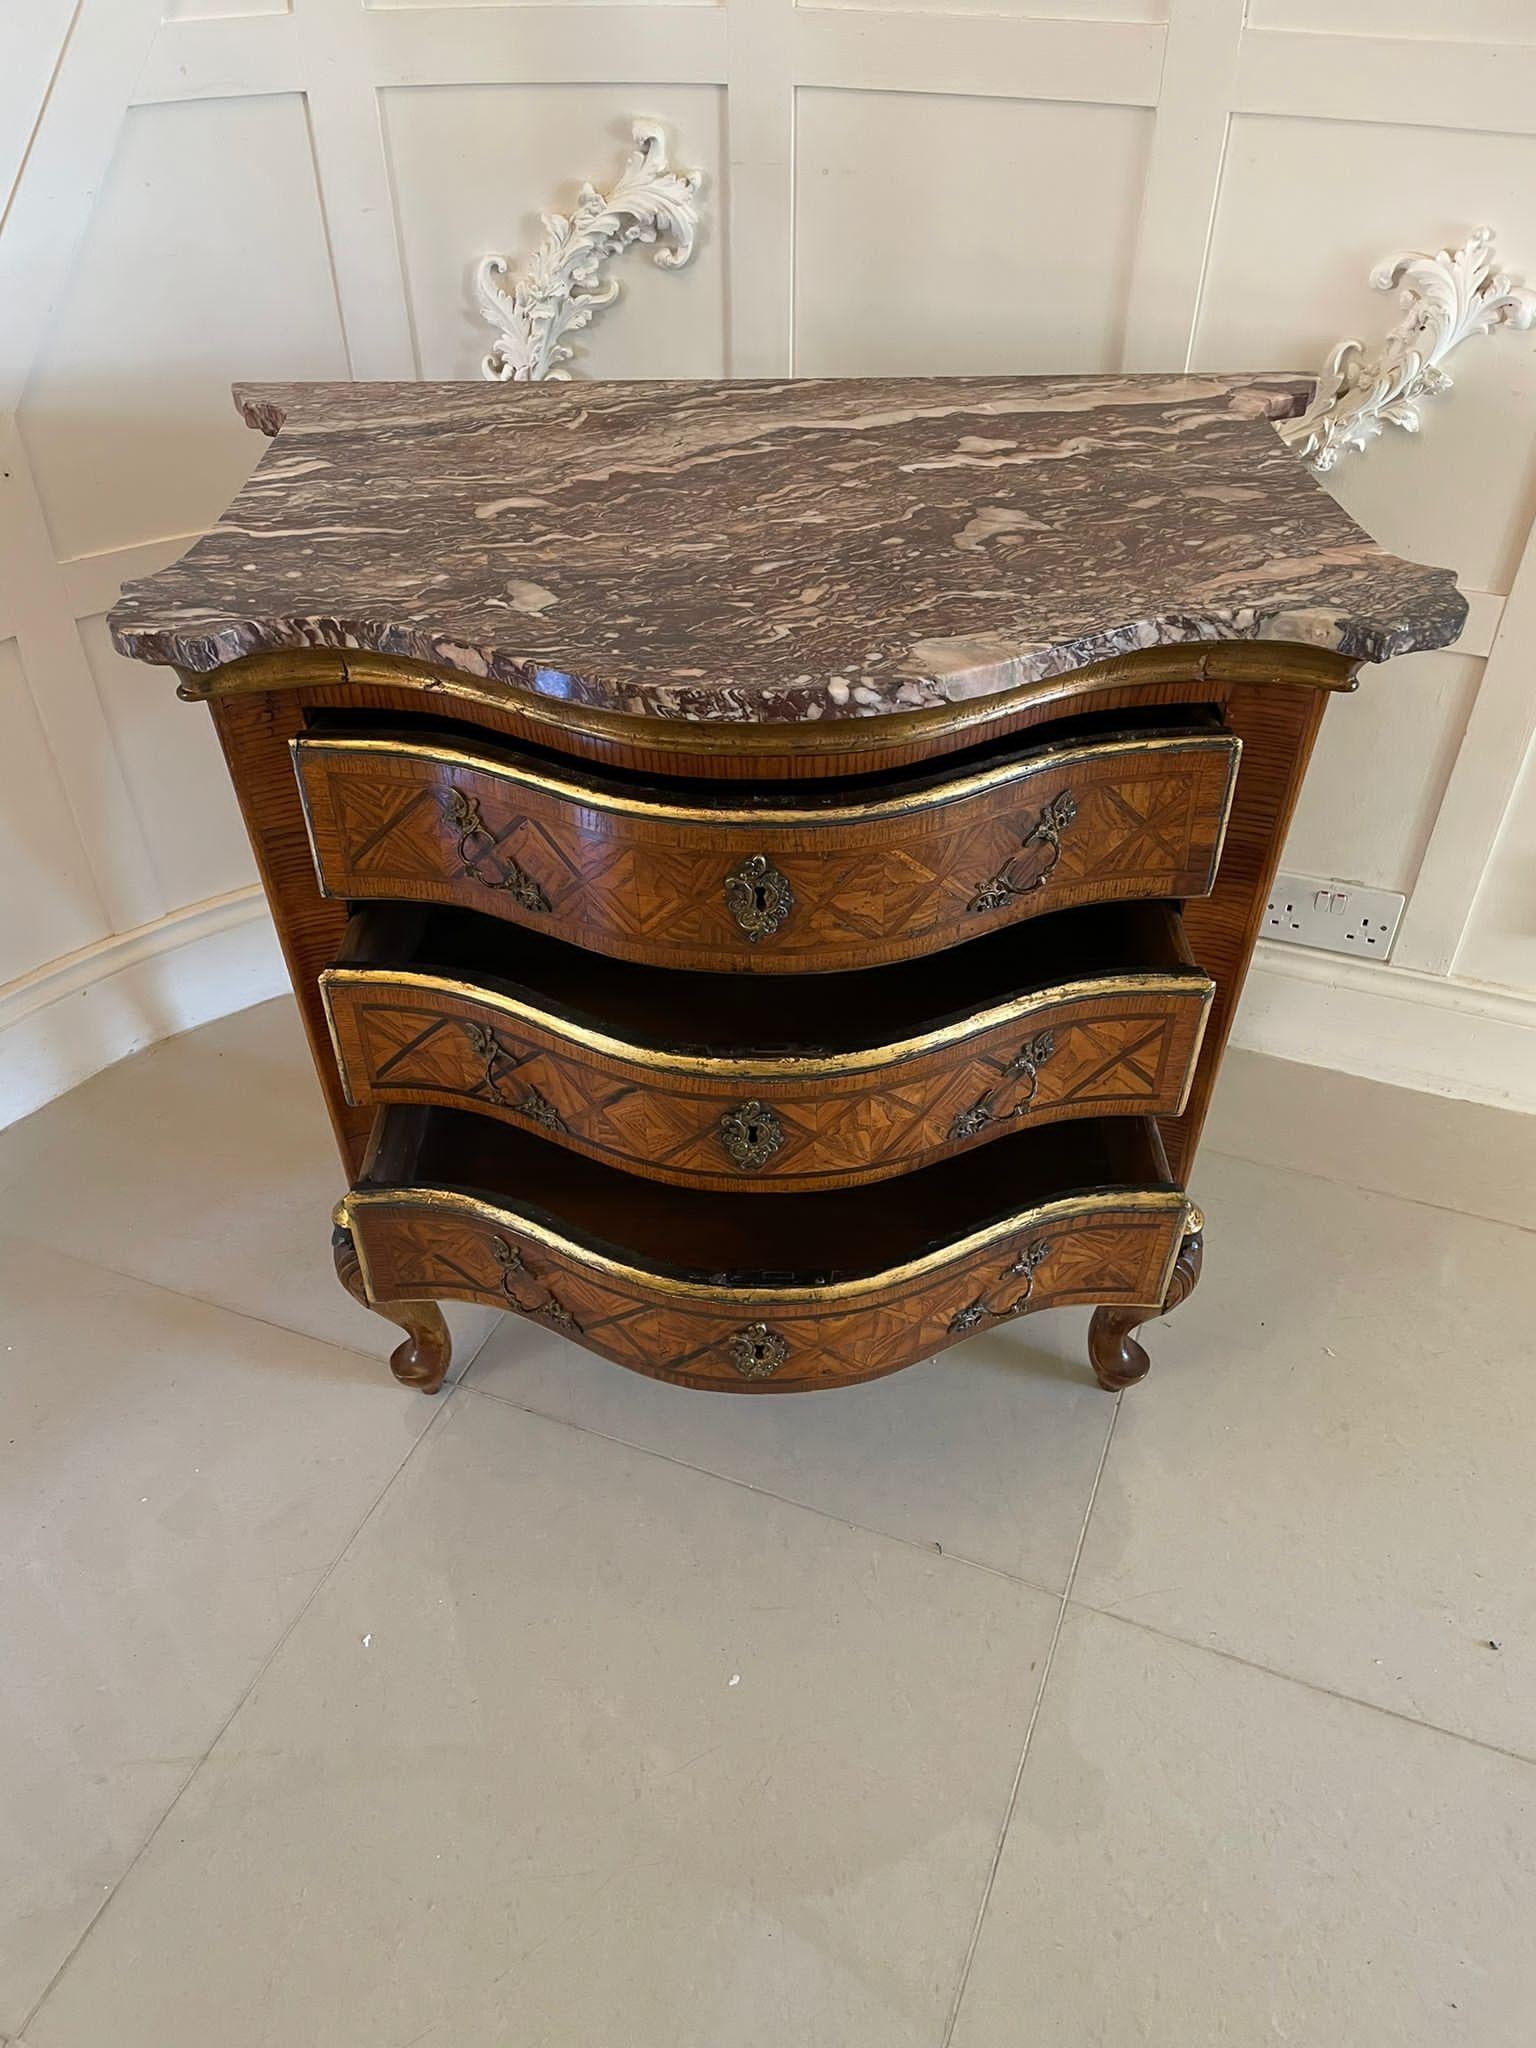 Antique Quality Parquetry Inlaid Serpentine Shaped Marble Top Commode Chest For Sale 3